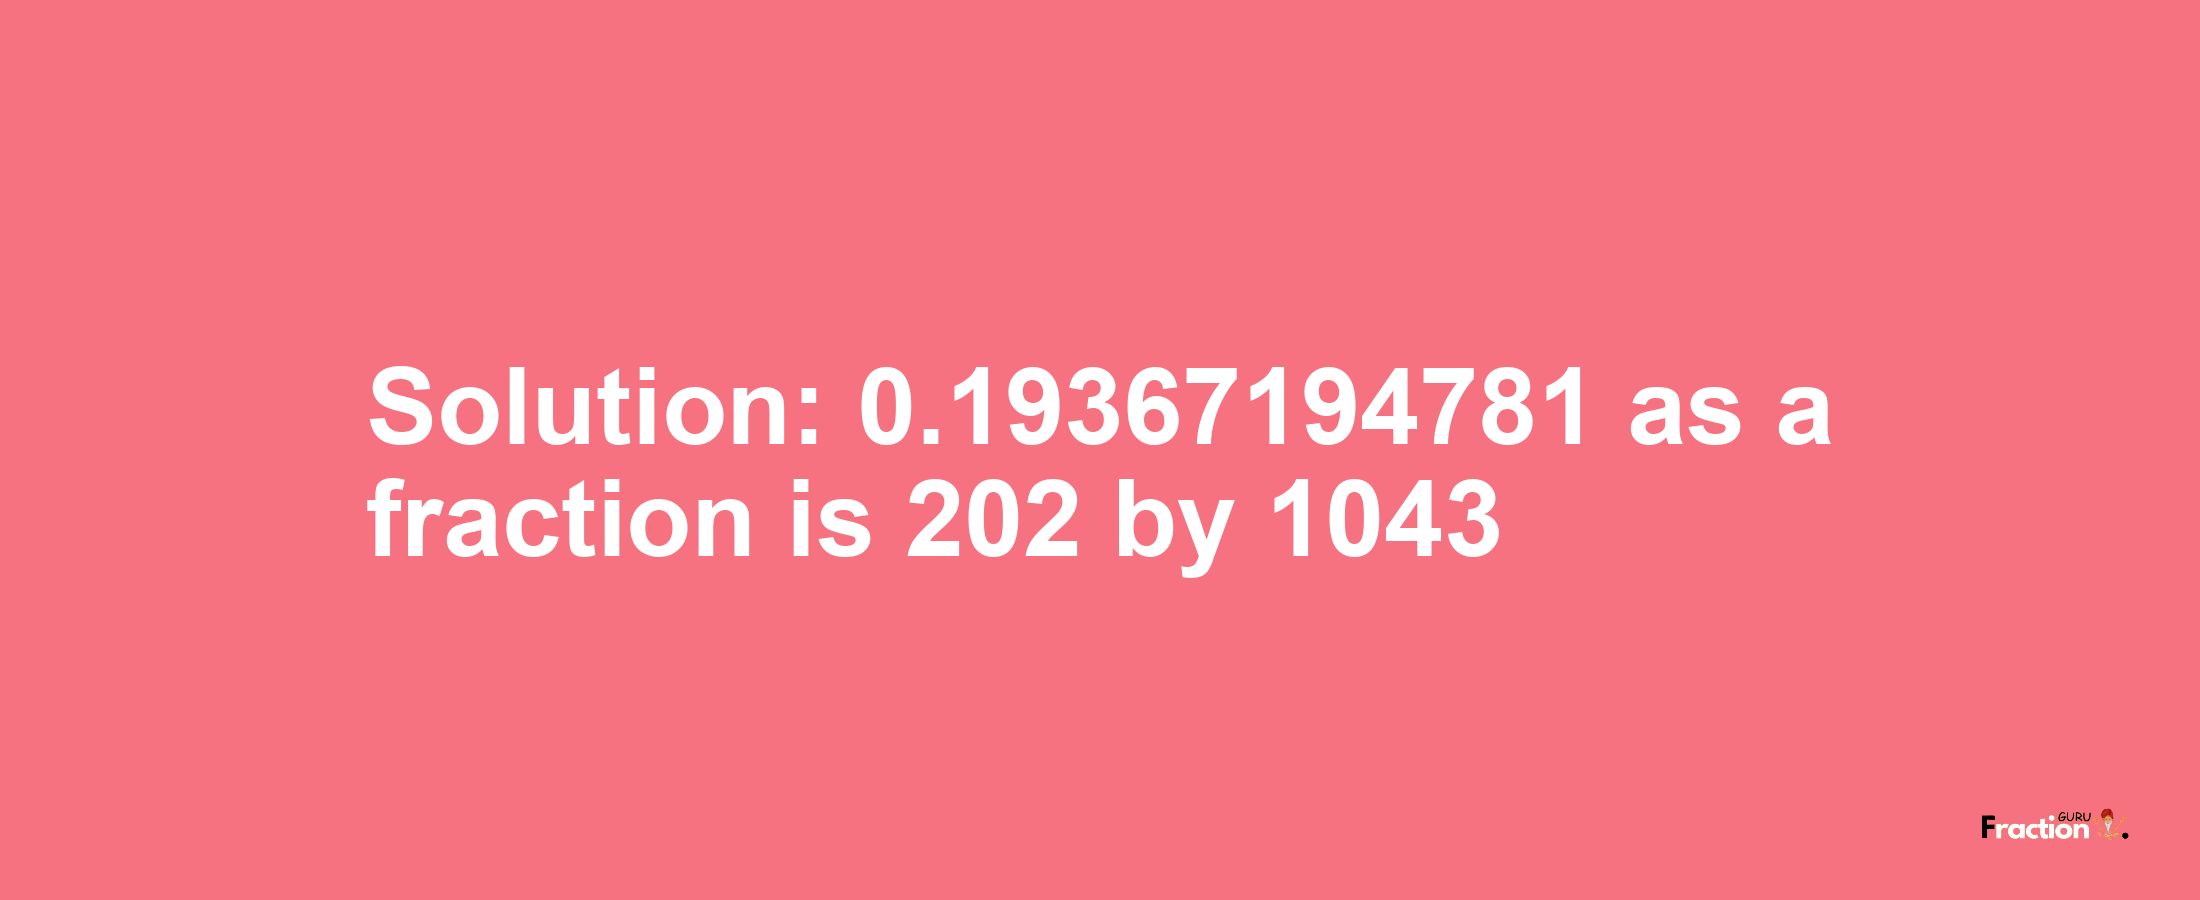 Solution:0.19367194781 as a fraction is 202/1043